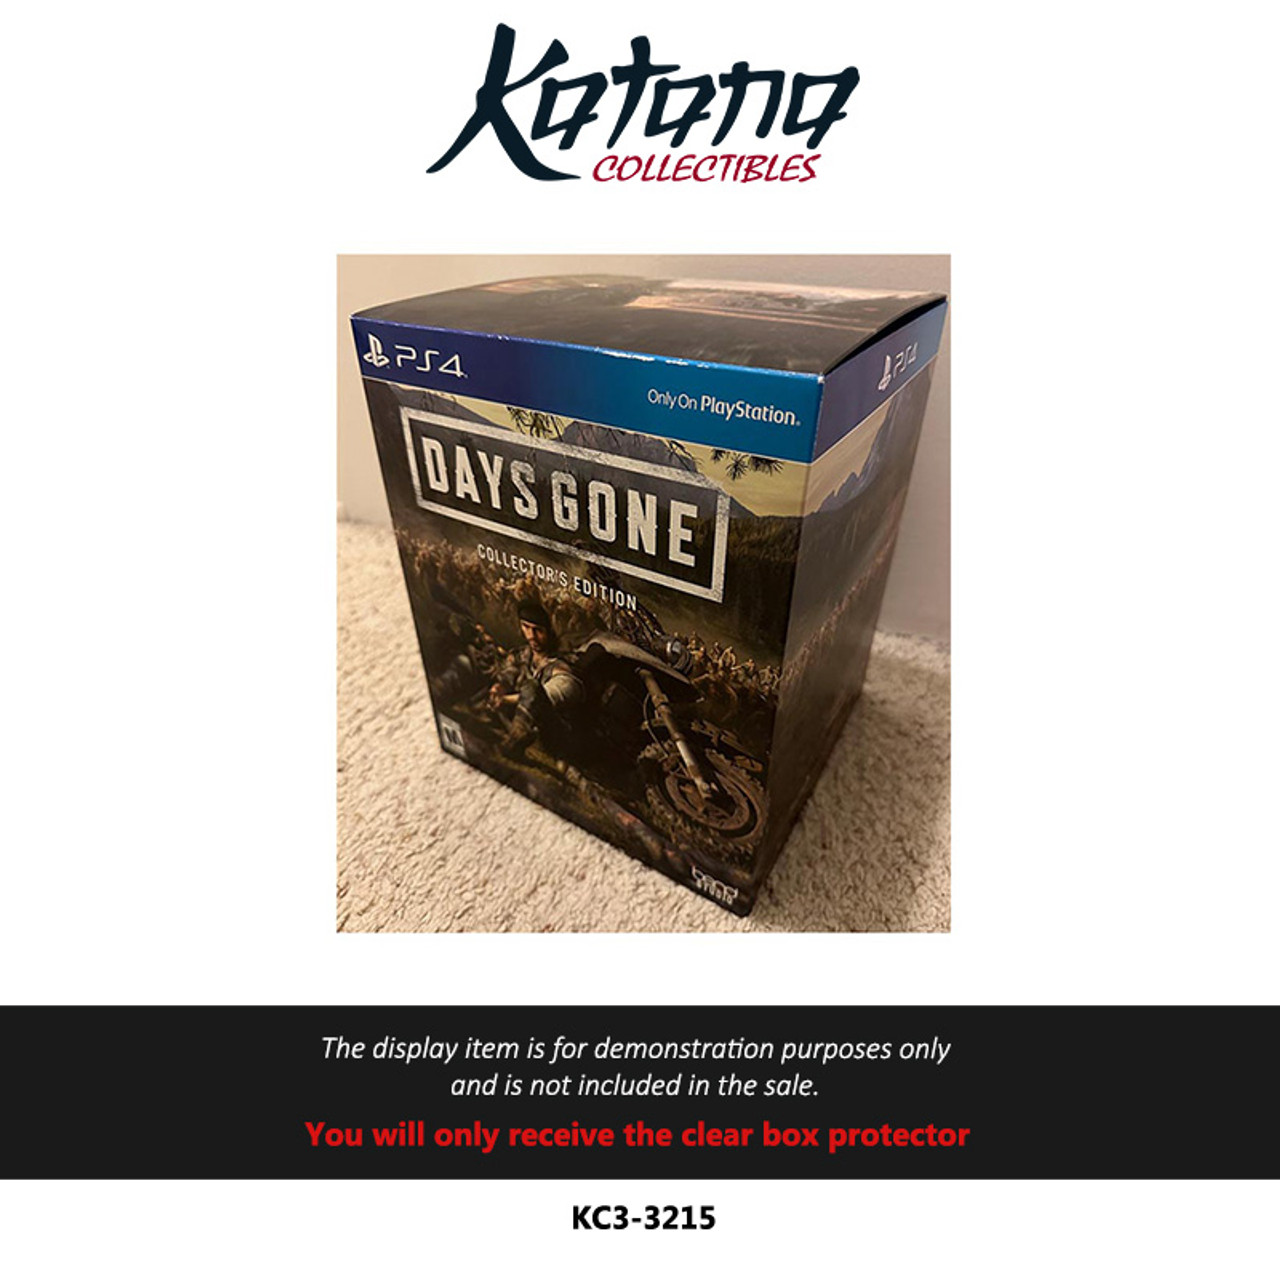 Katana Collectibles Protector For Days Gone - Collectors Edition